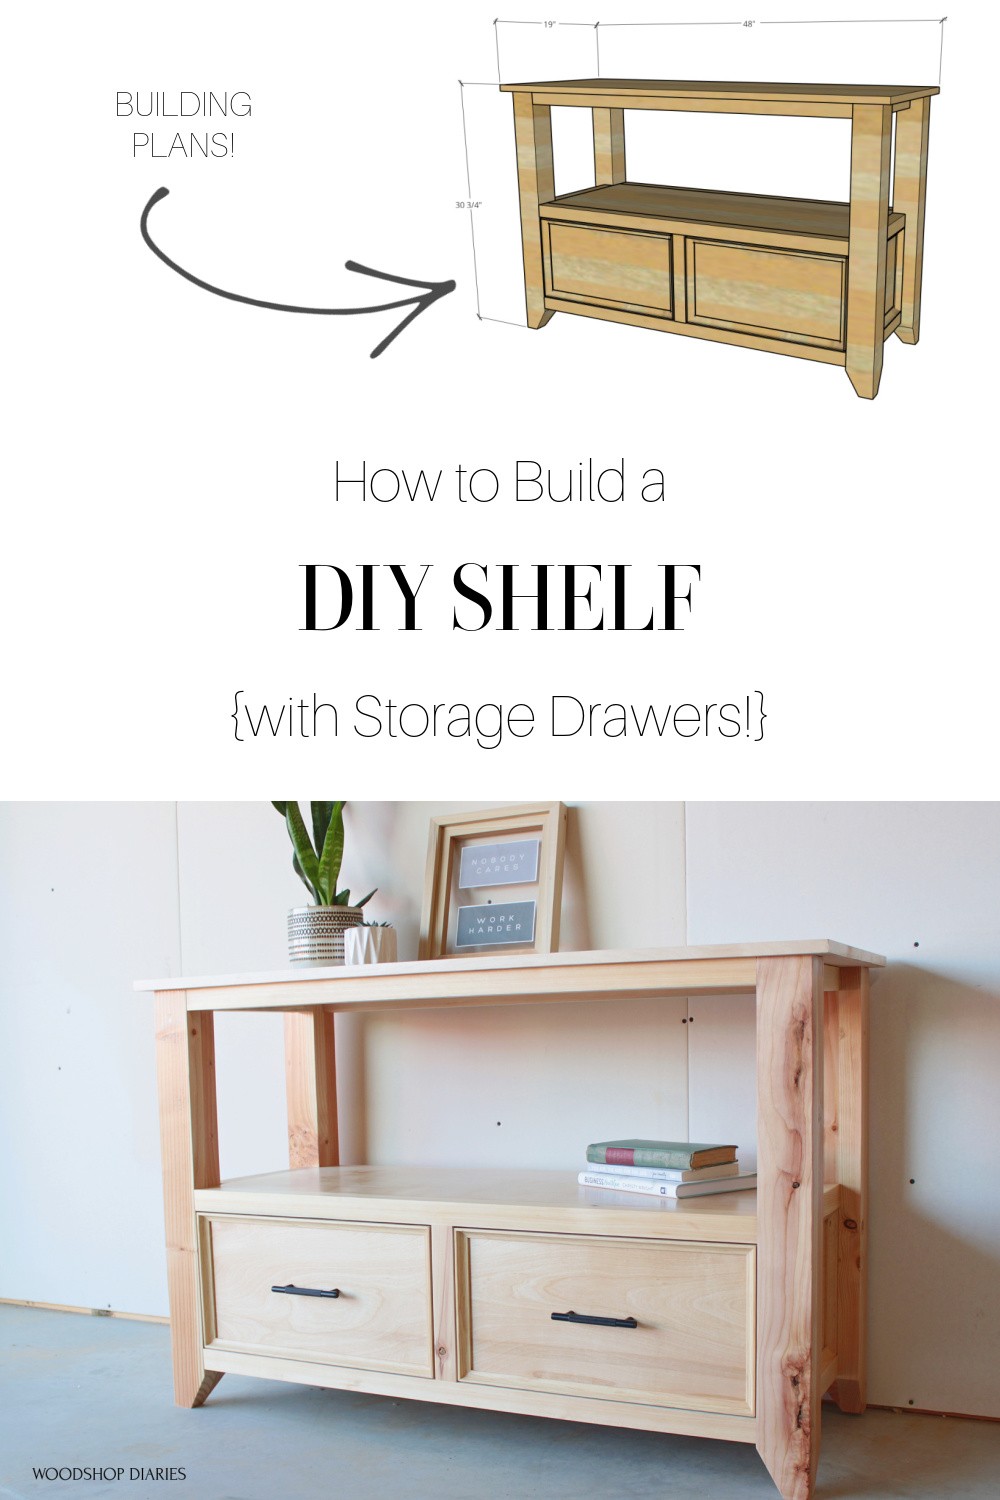 How to DIY Mini Drawer Organizer from Match Boxes - DIY Tutorials